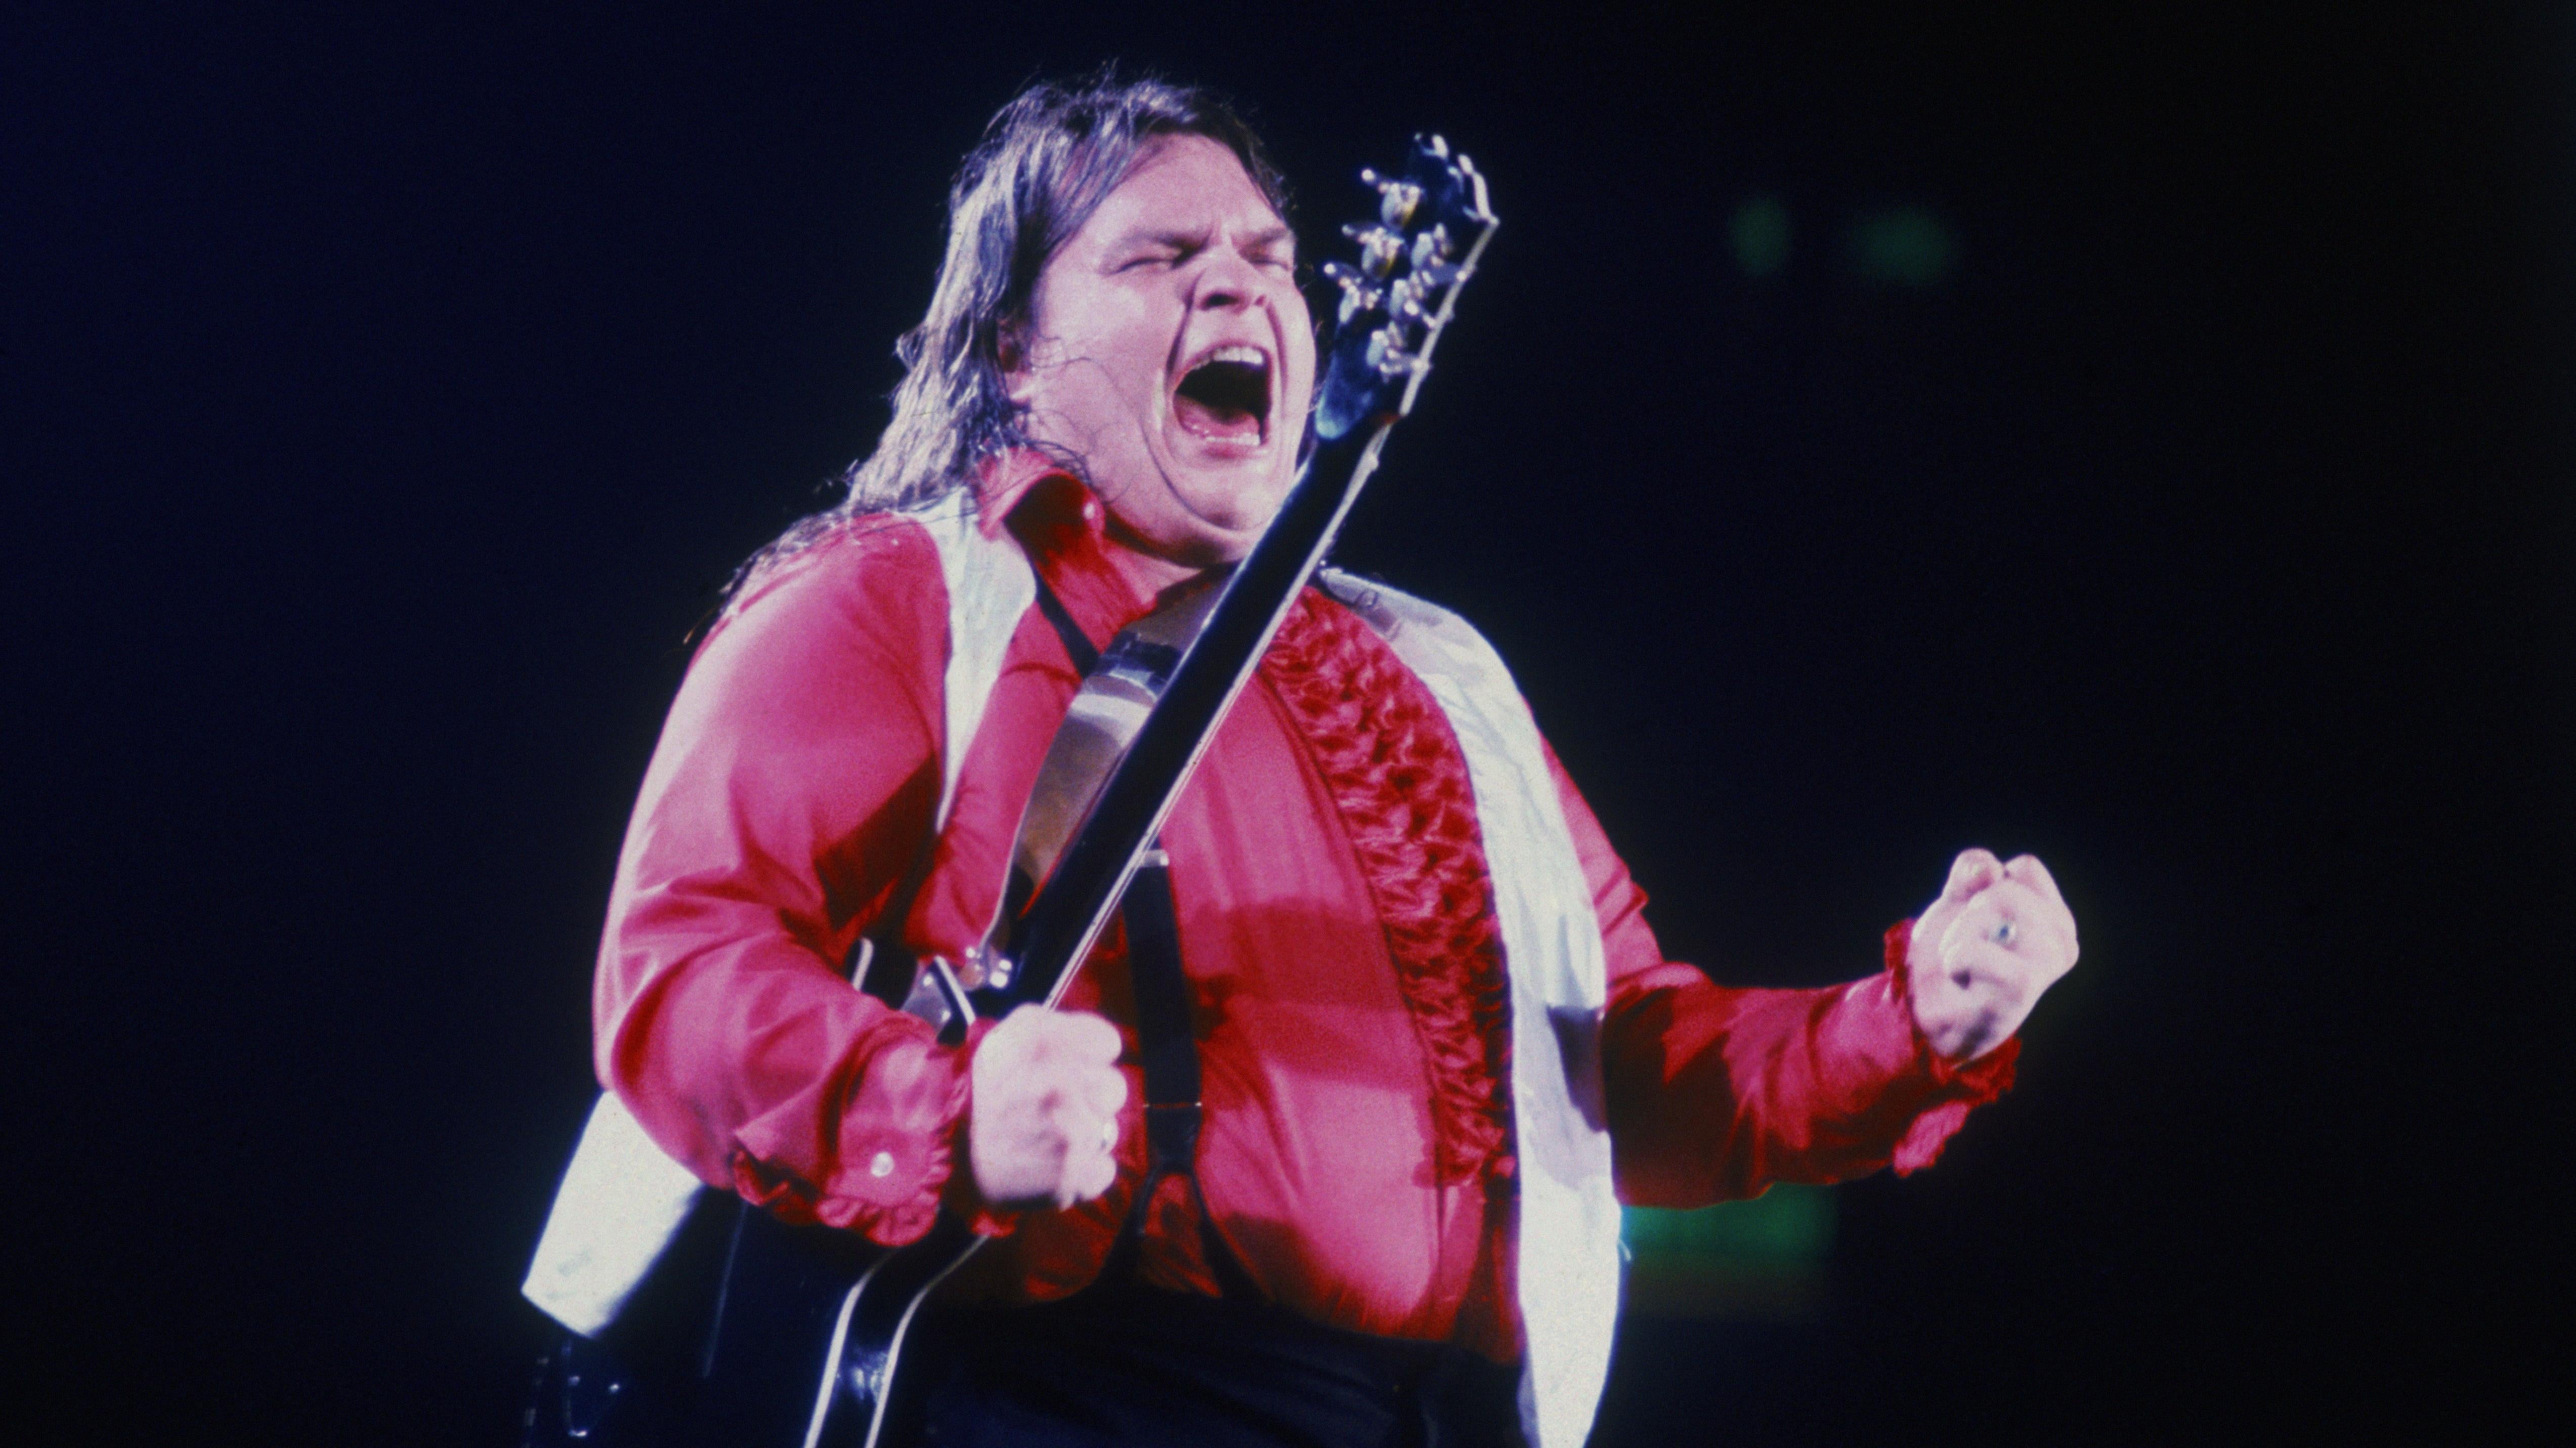 Meat Loaf performing, circa 1977. (Photo: Keystone/Hulton Archive, Getty Images)